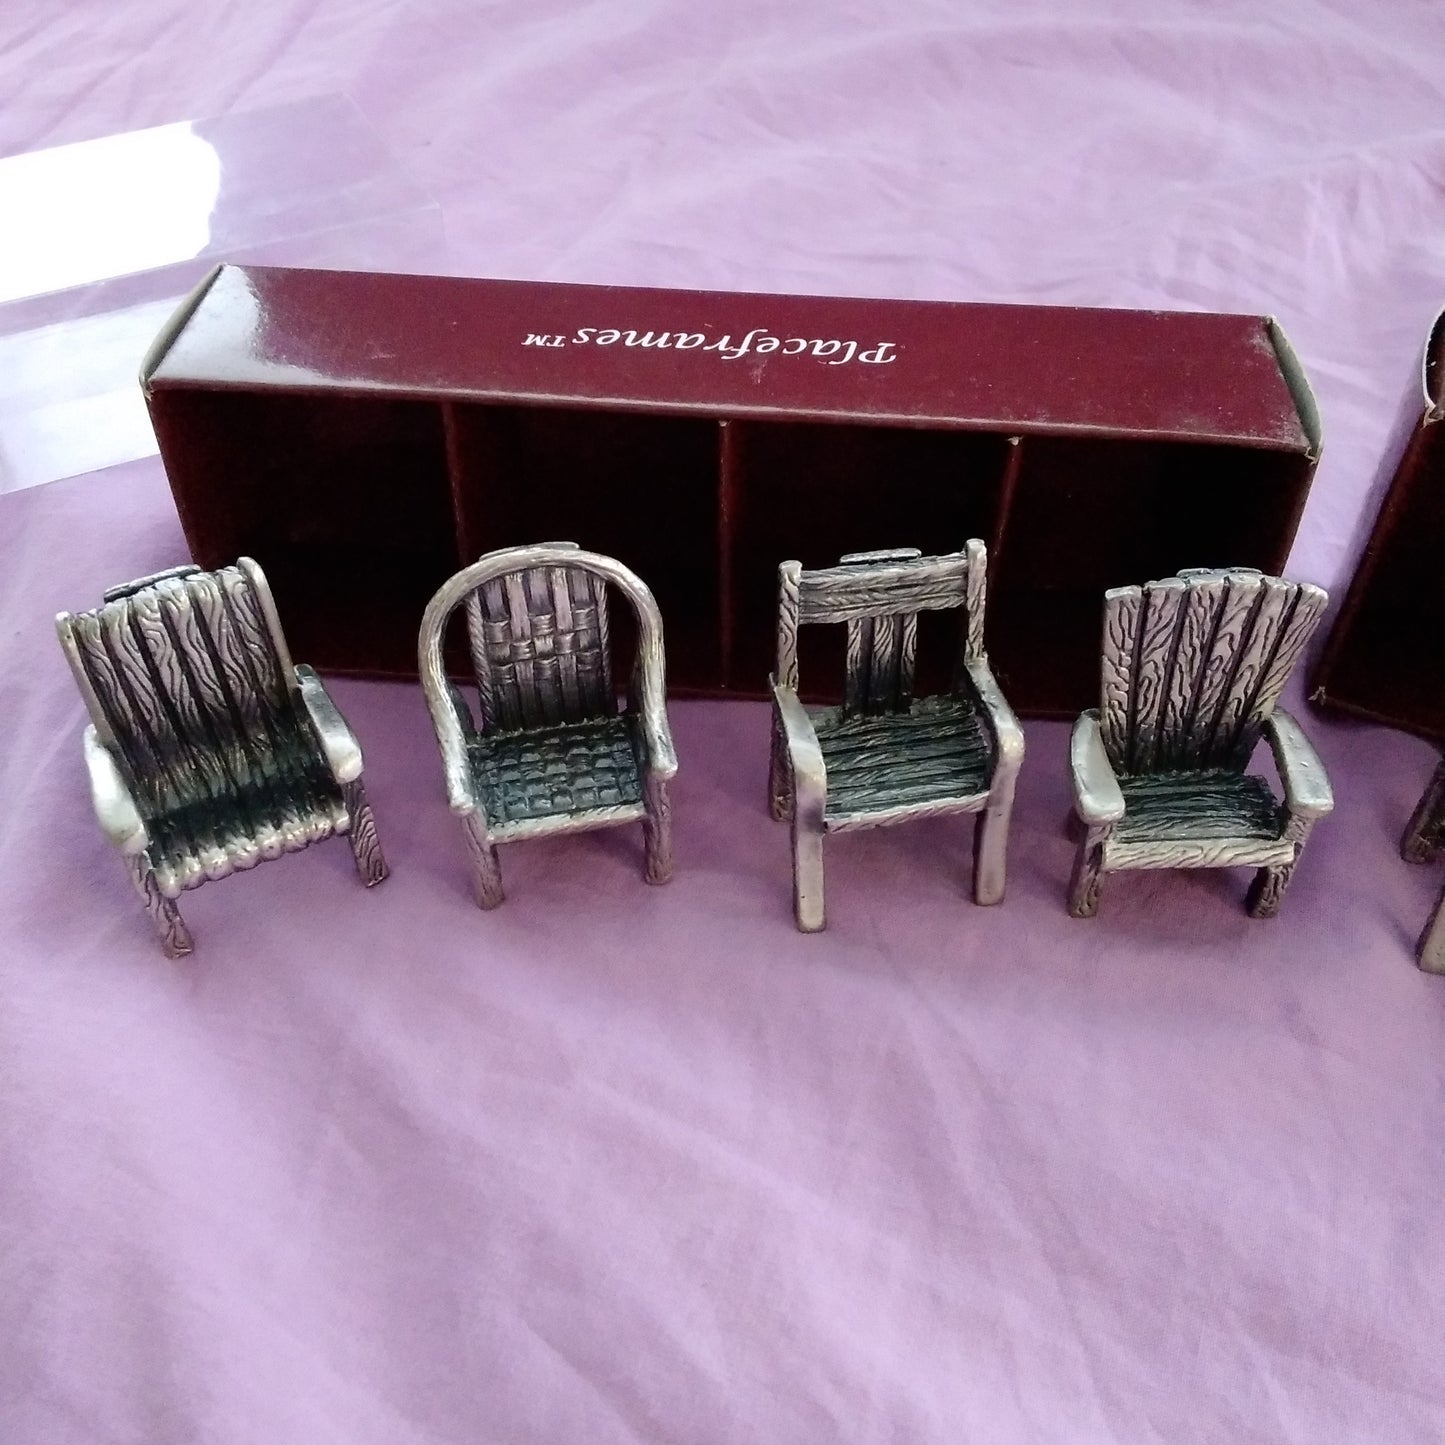 NIB - Sixtrees Ltd. Handcrafted Pewter Miniature Chair Placeframes - 2 Packs